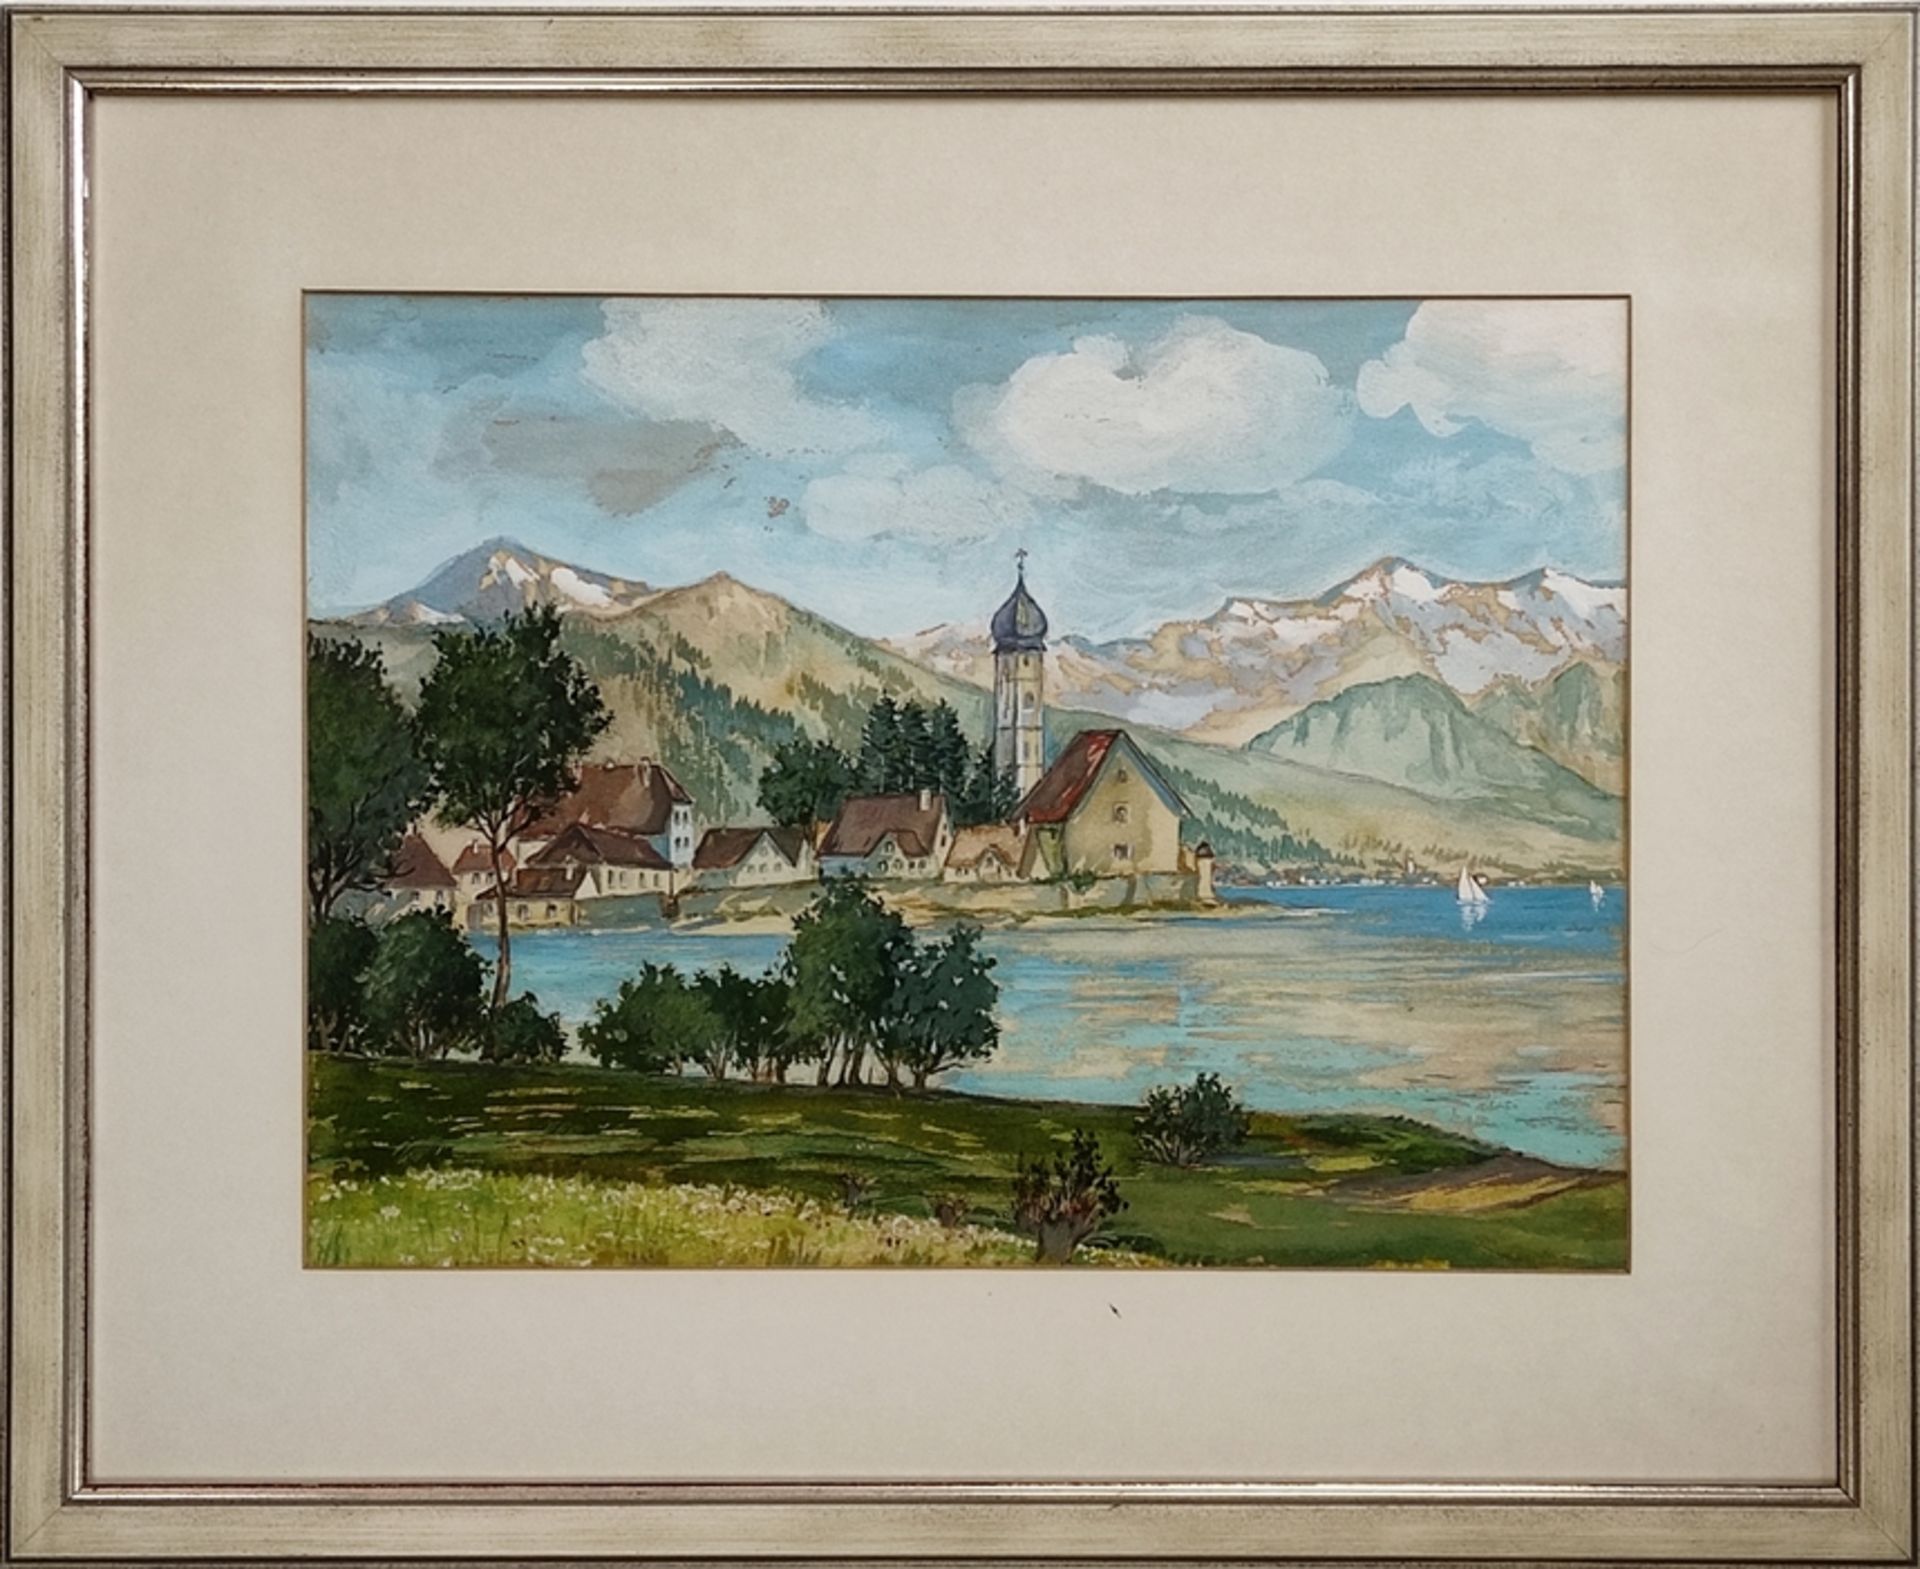 Kellermann, Karl (1881 Constance - 1968 Constance) "Wasserburg" at Lake Constance, gouache on paper - Image 2 of 2